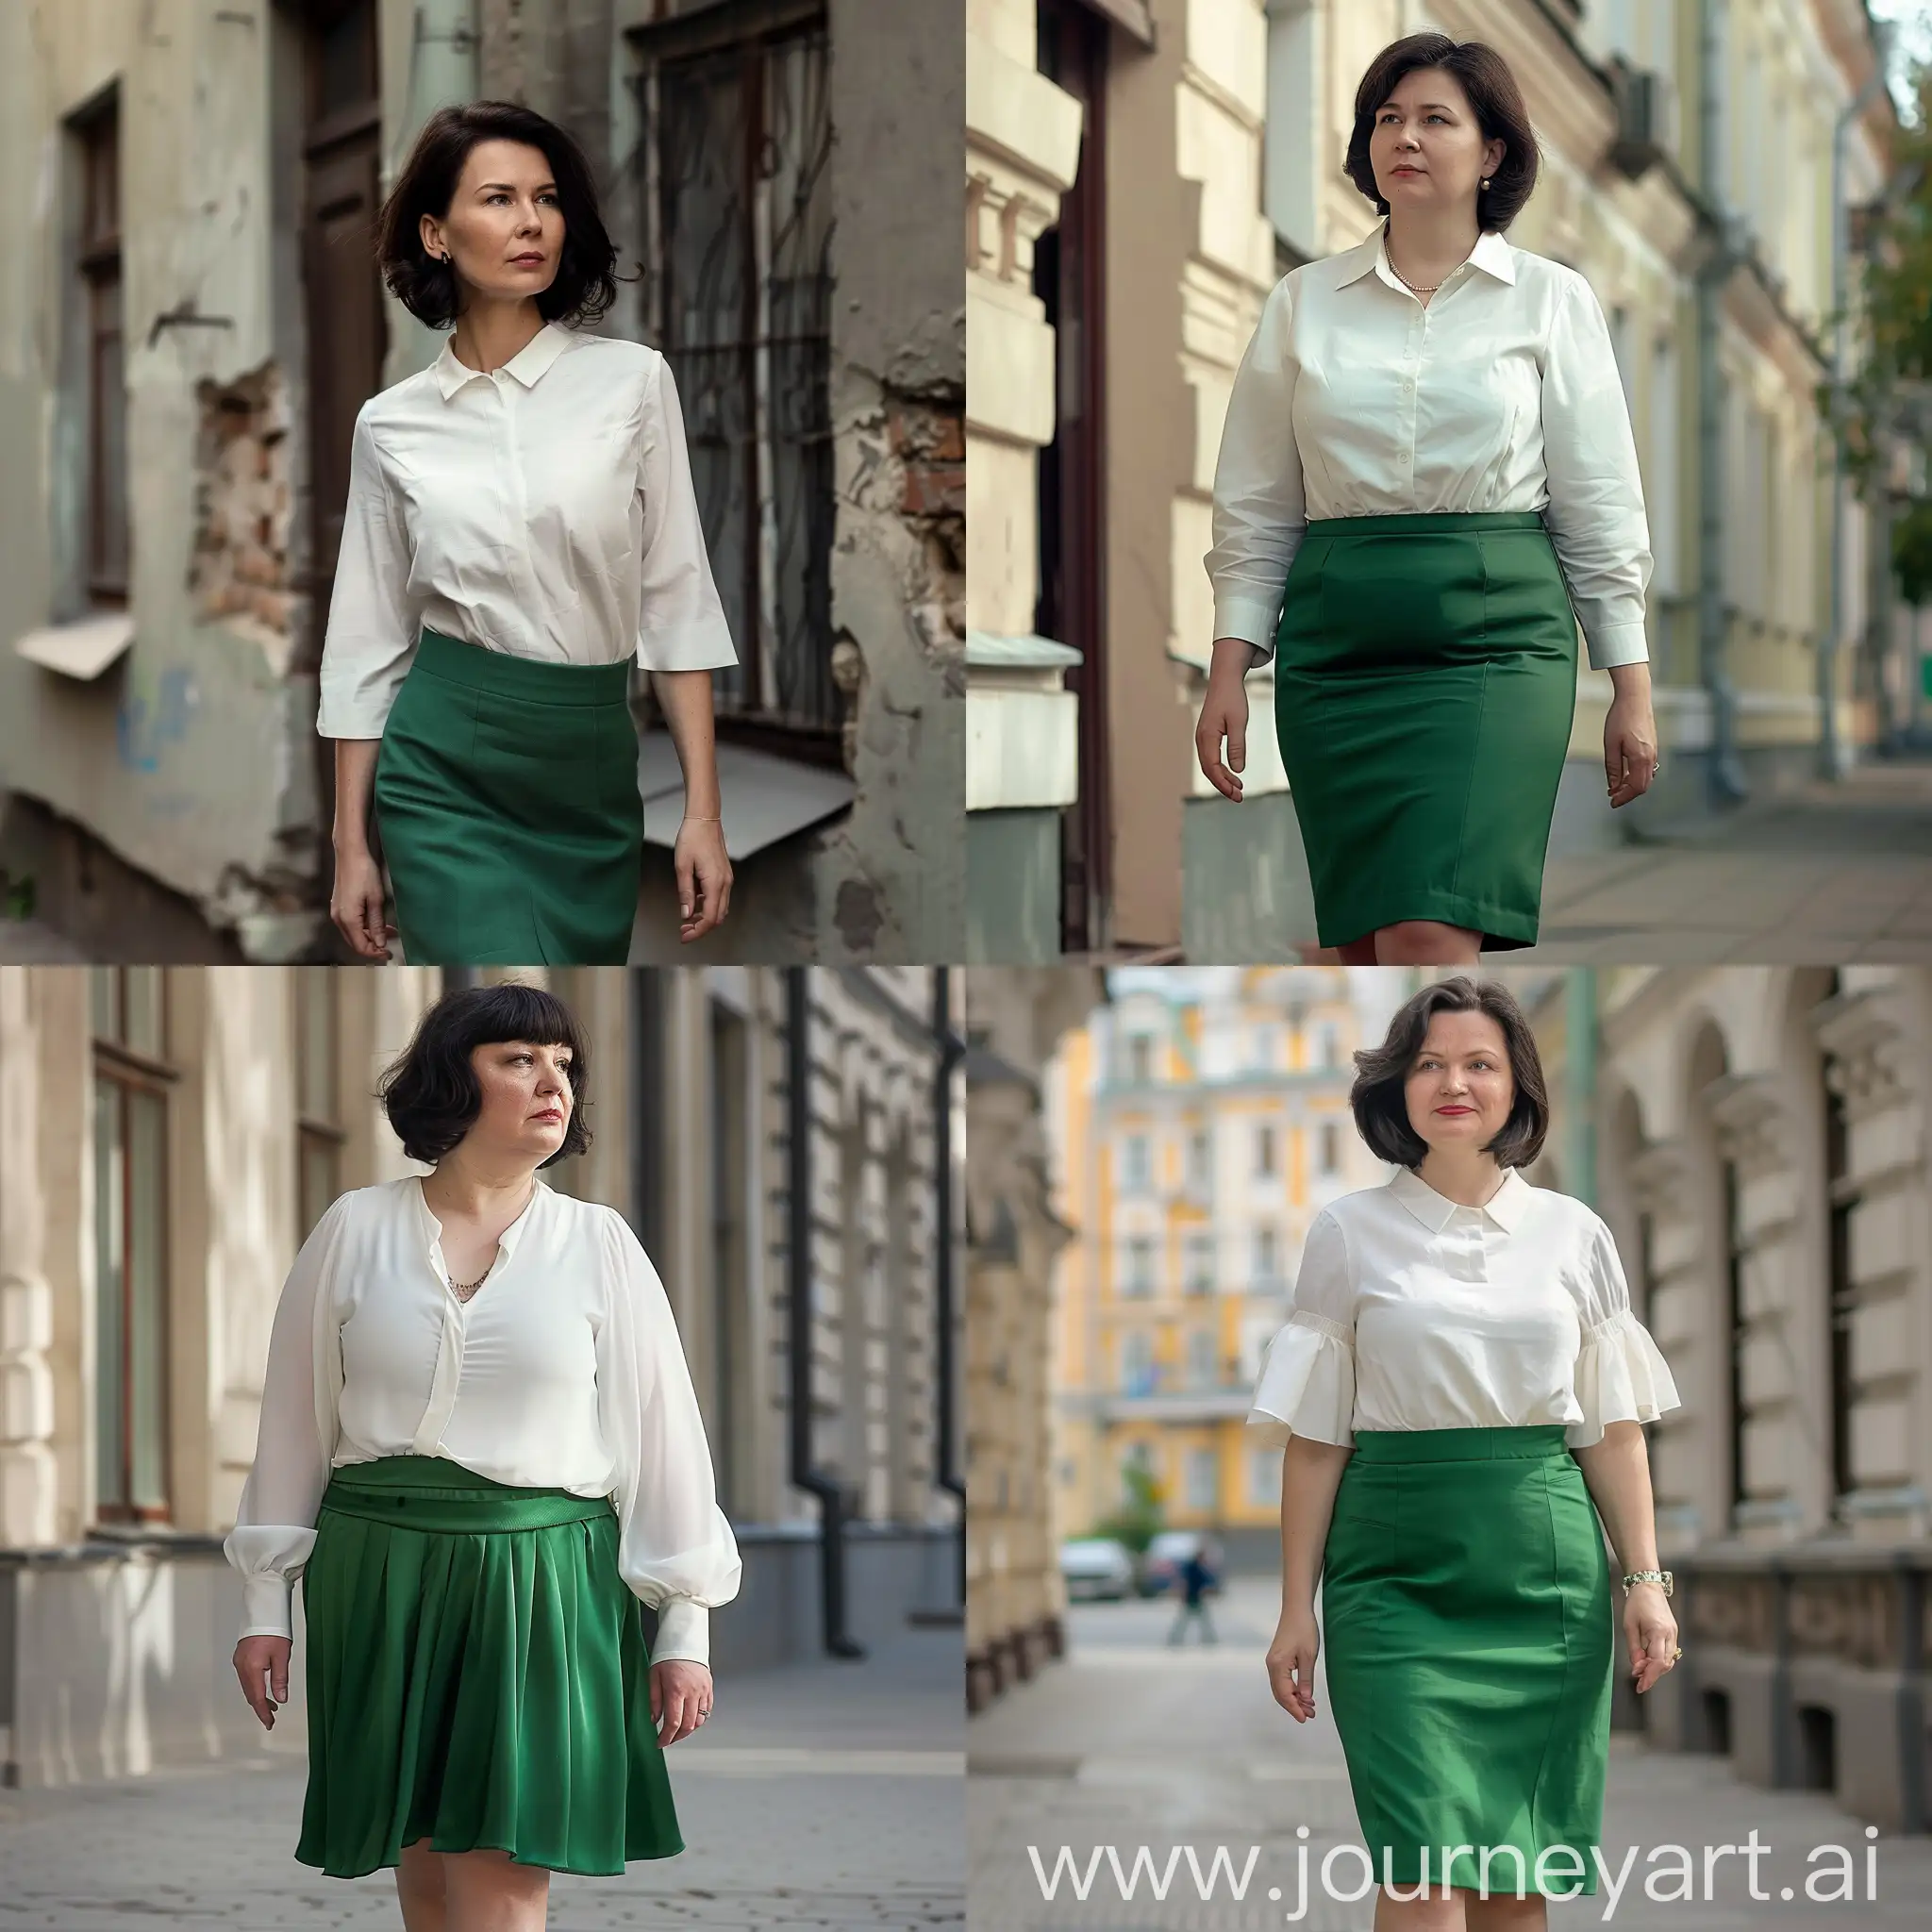 Experienced-Russian-Language-and-Literature-Teacher-in-Green-Skirt-and-White-Blouse